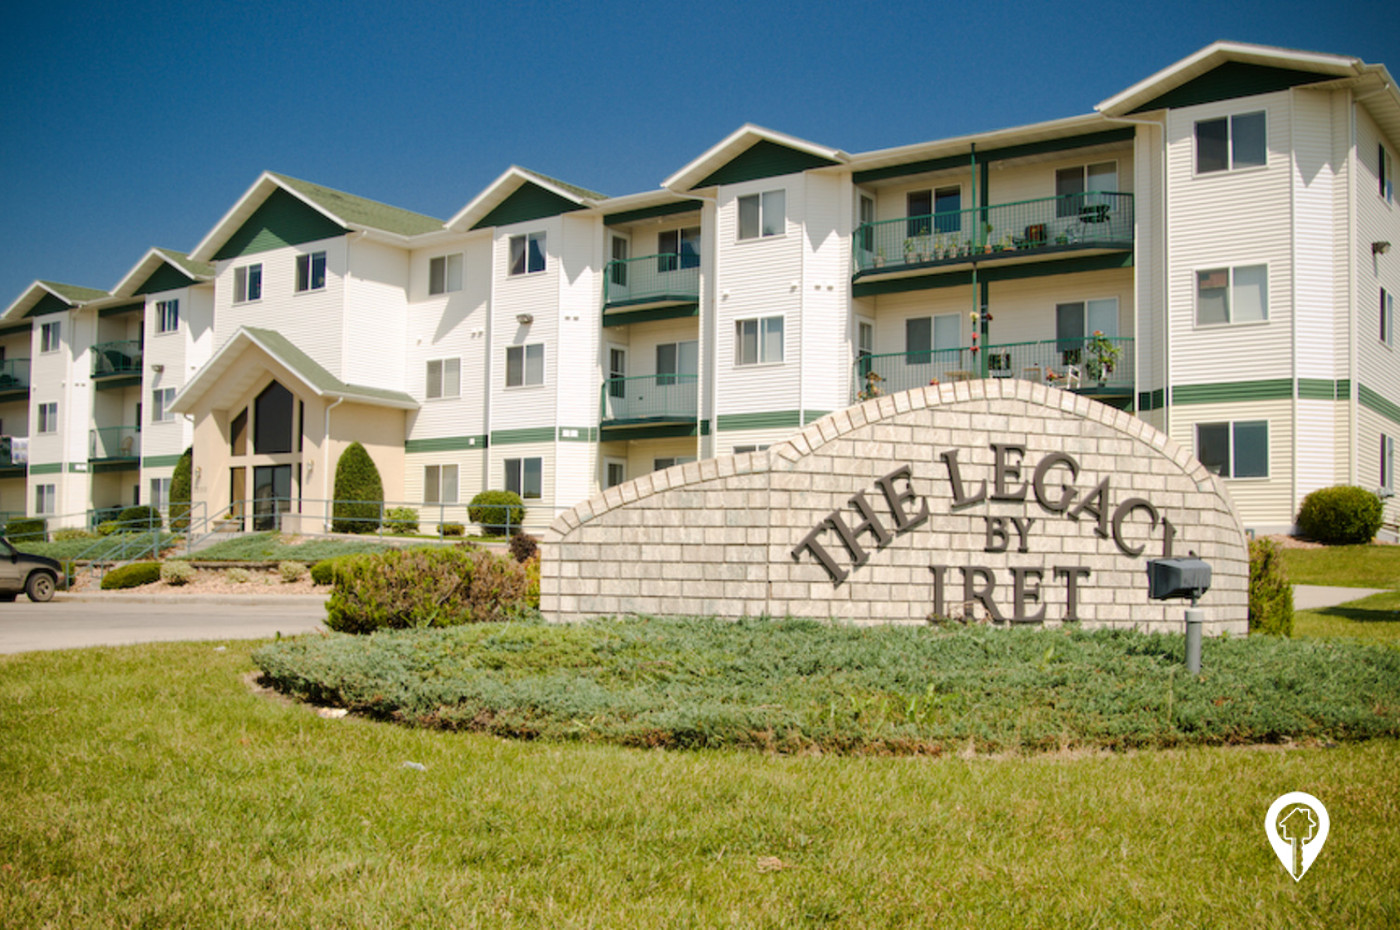 The Legacy Apartments